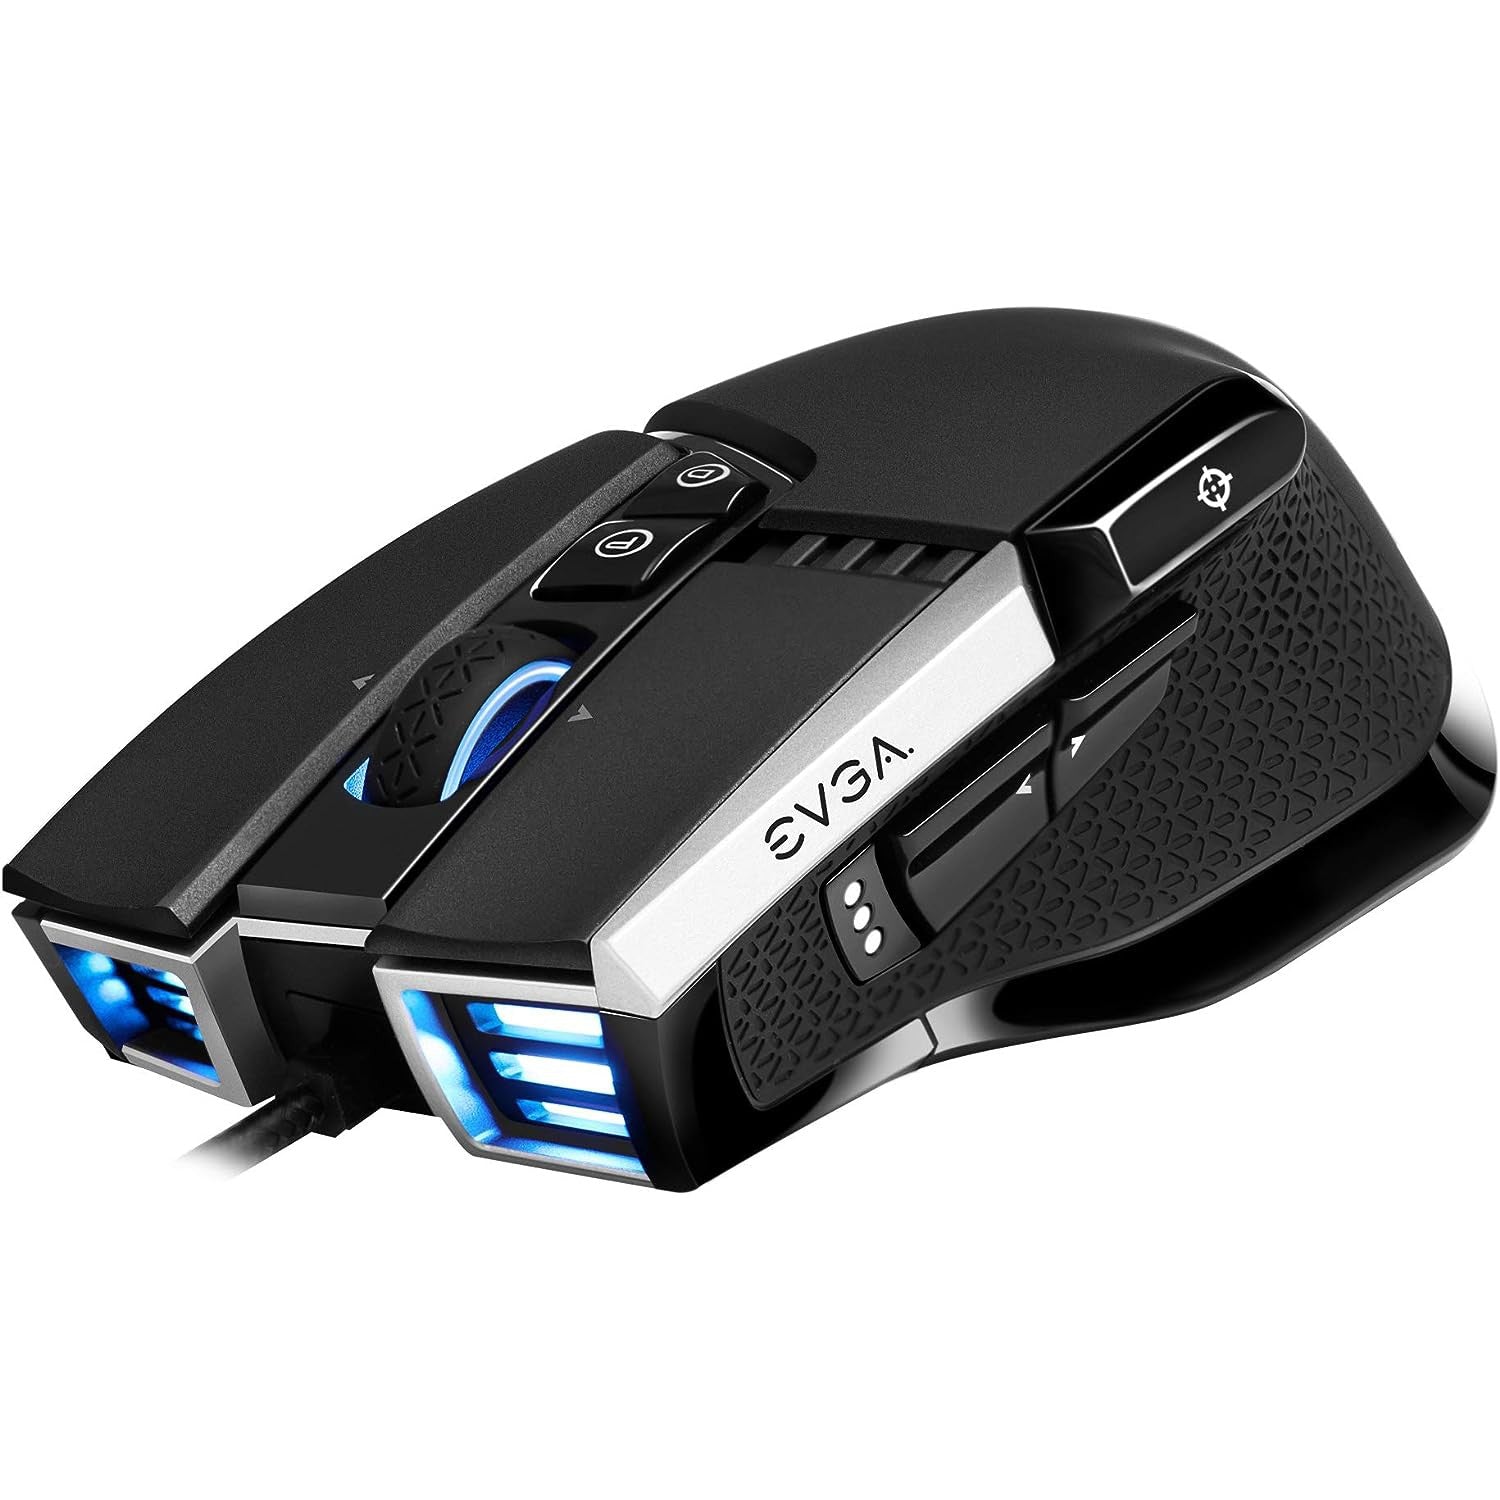 EVGA X17 FPS Wired Gaming Mouse - Black